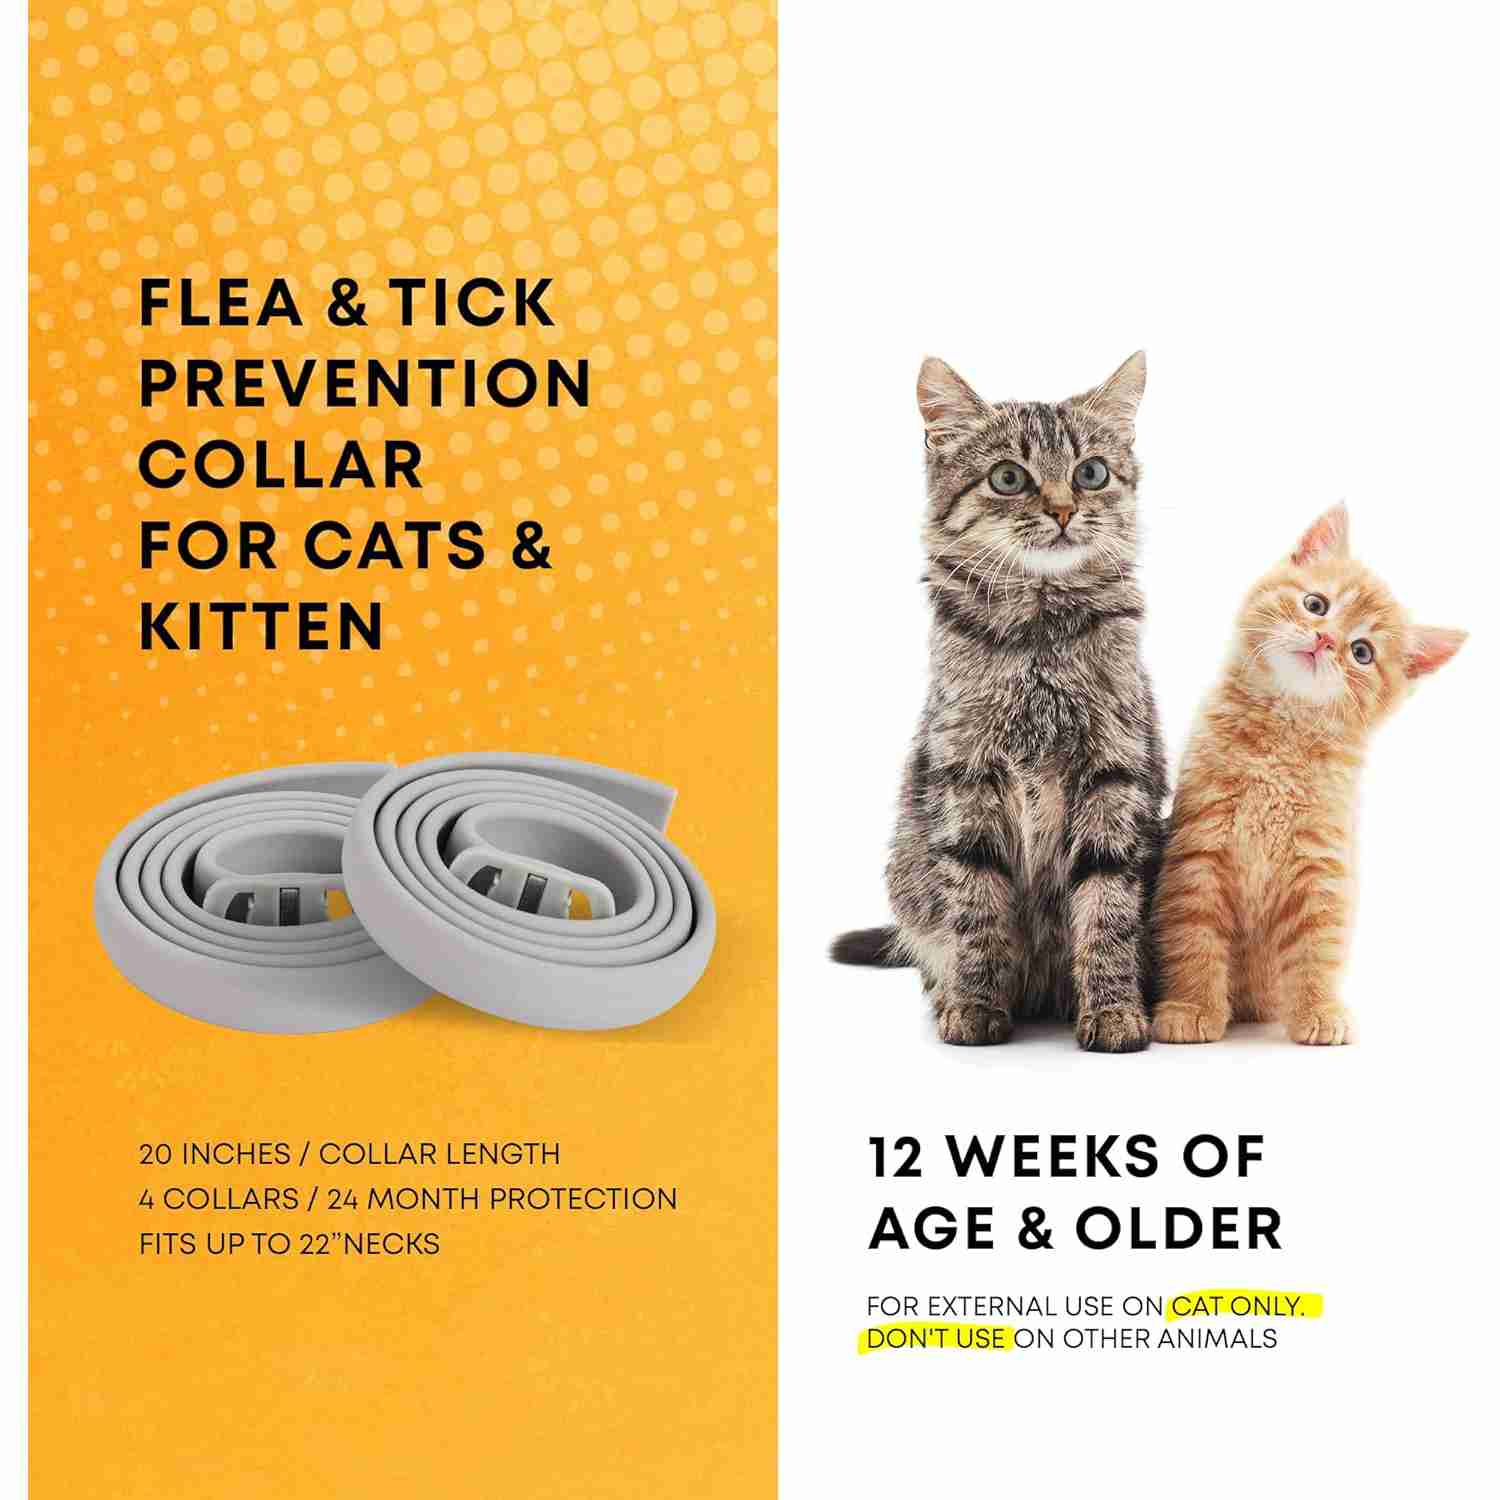 flea-and-tick-prevention-for-cats-collar for cheap